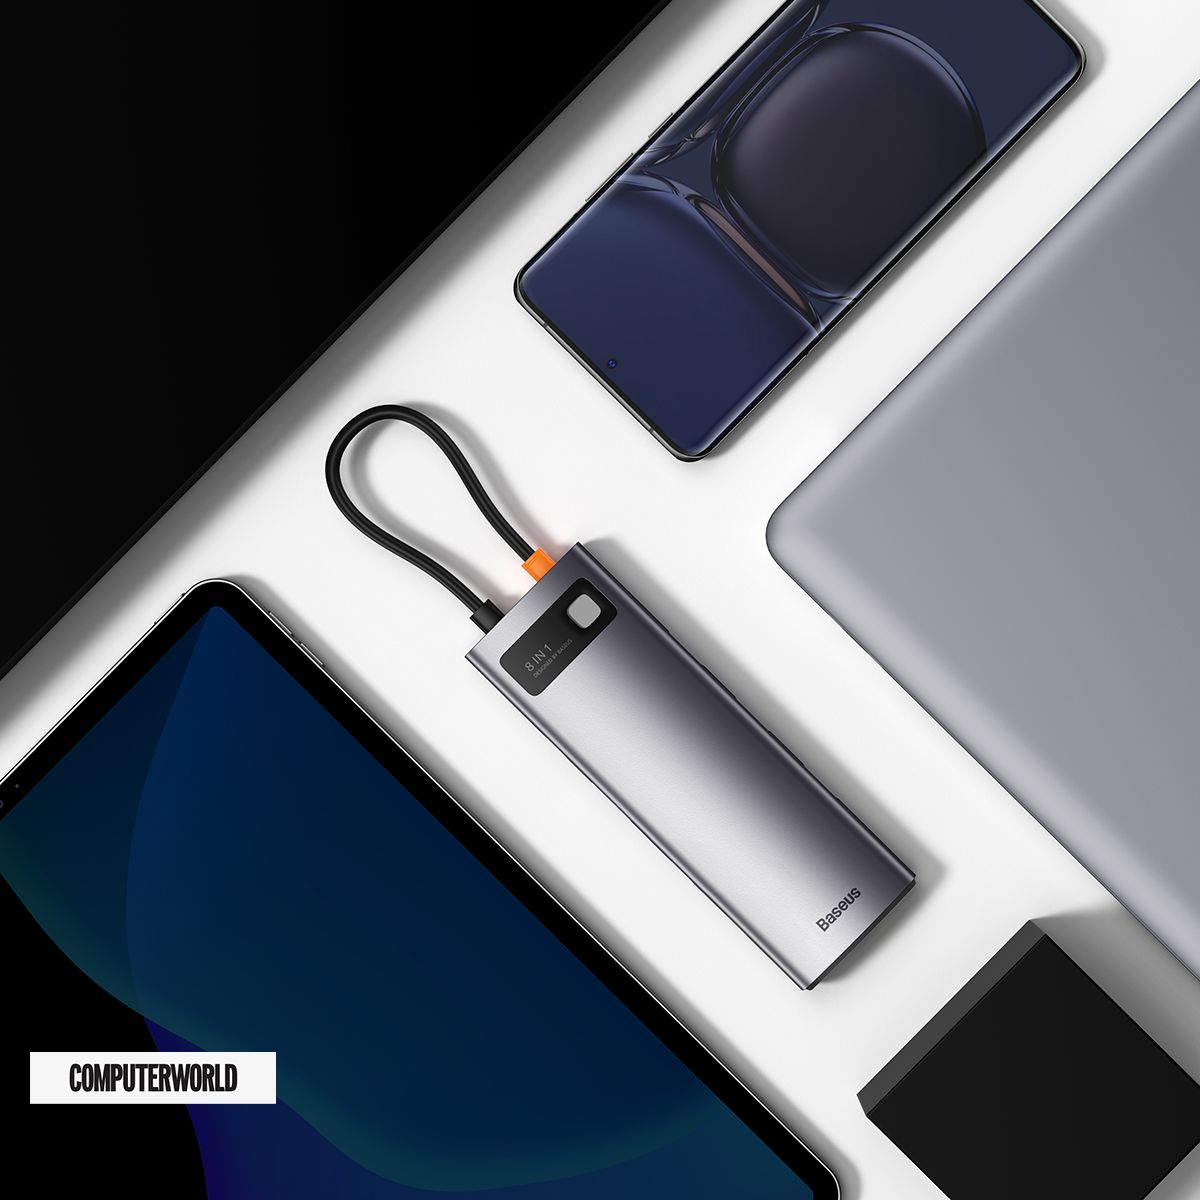 USB-C explained: How to get the most from it (and why it still keeps getting better)